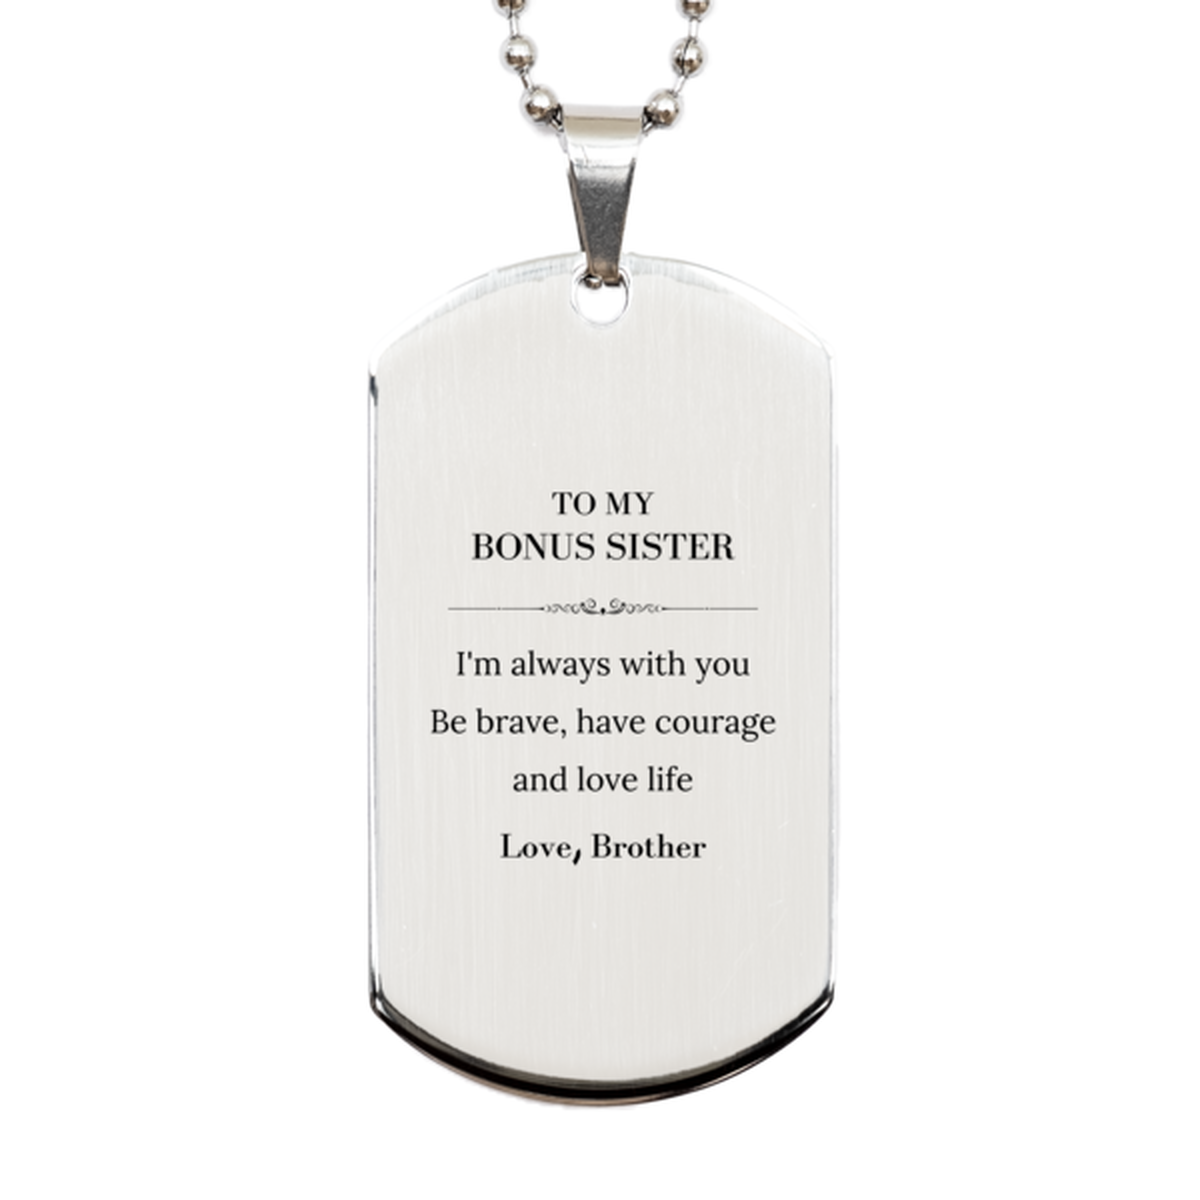 To My Bonus Sister Gifts from Brother, Unique Silver Dog Tag Inspirational Christmas Birthday Graduation Gifts for Bonus Sister I'm always with you. Be brave, have courage and love life. Love, Brother